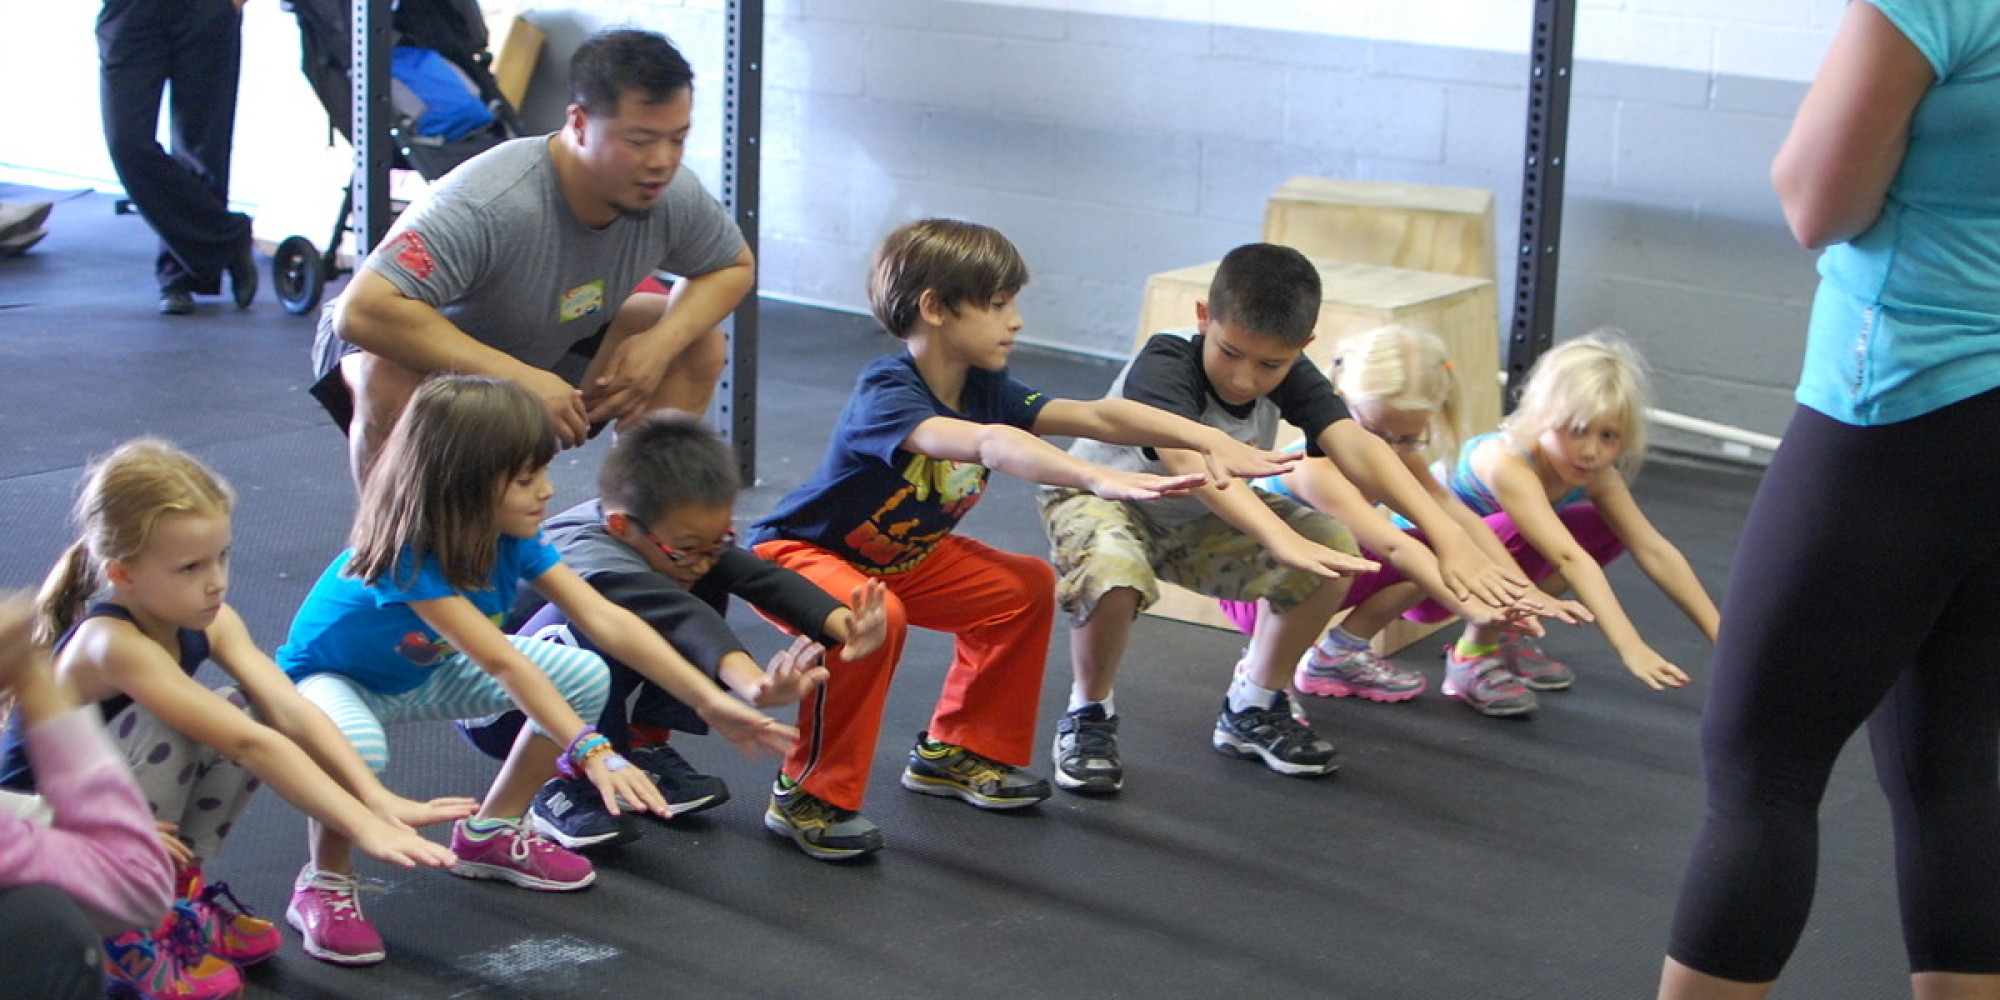 crossfit fitness toddler squat kid beasts calling lil huffpost craze expands